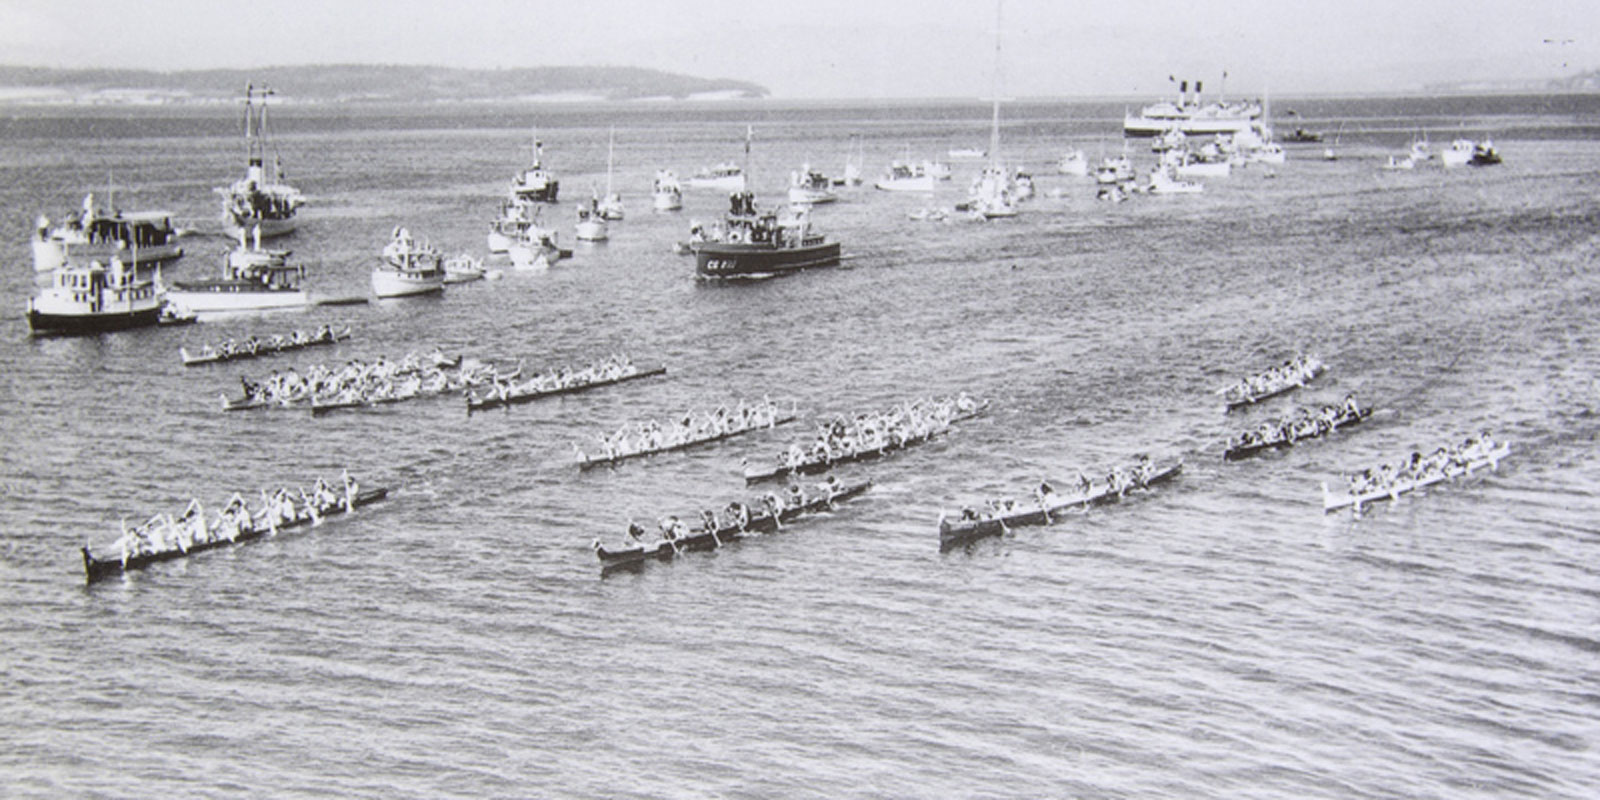 A 1934 photo of an eleven-boat canoe race